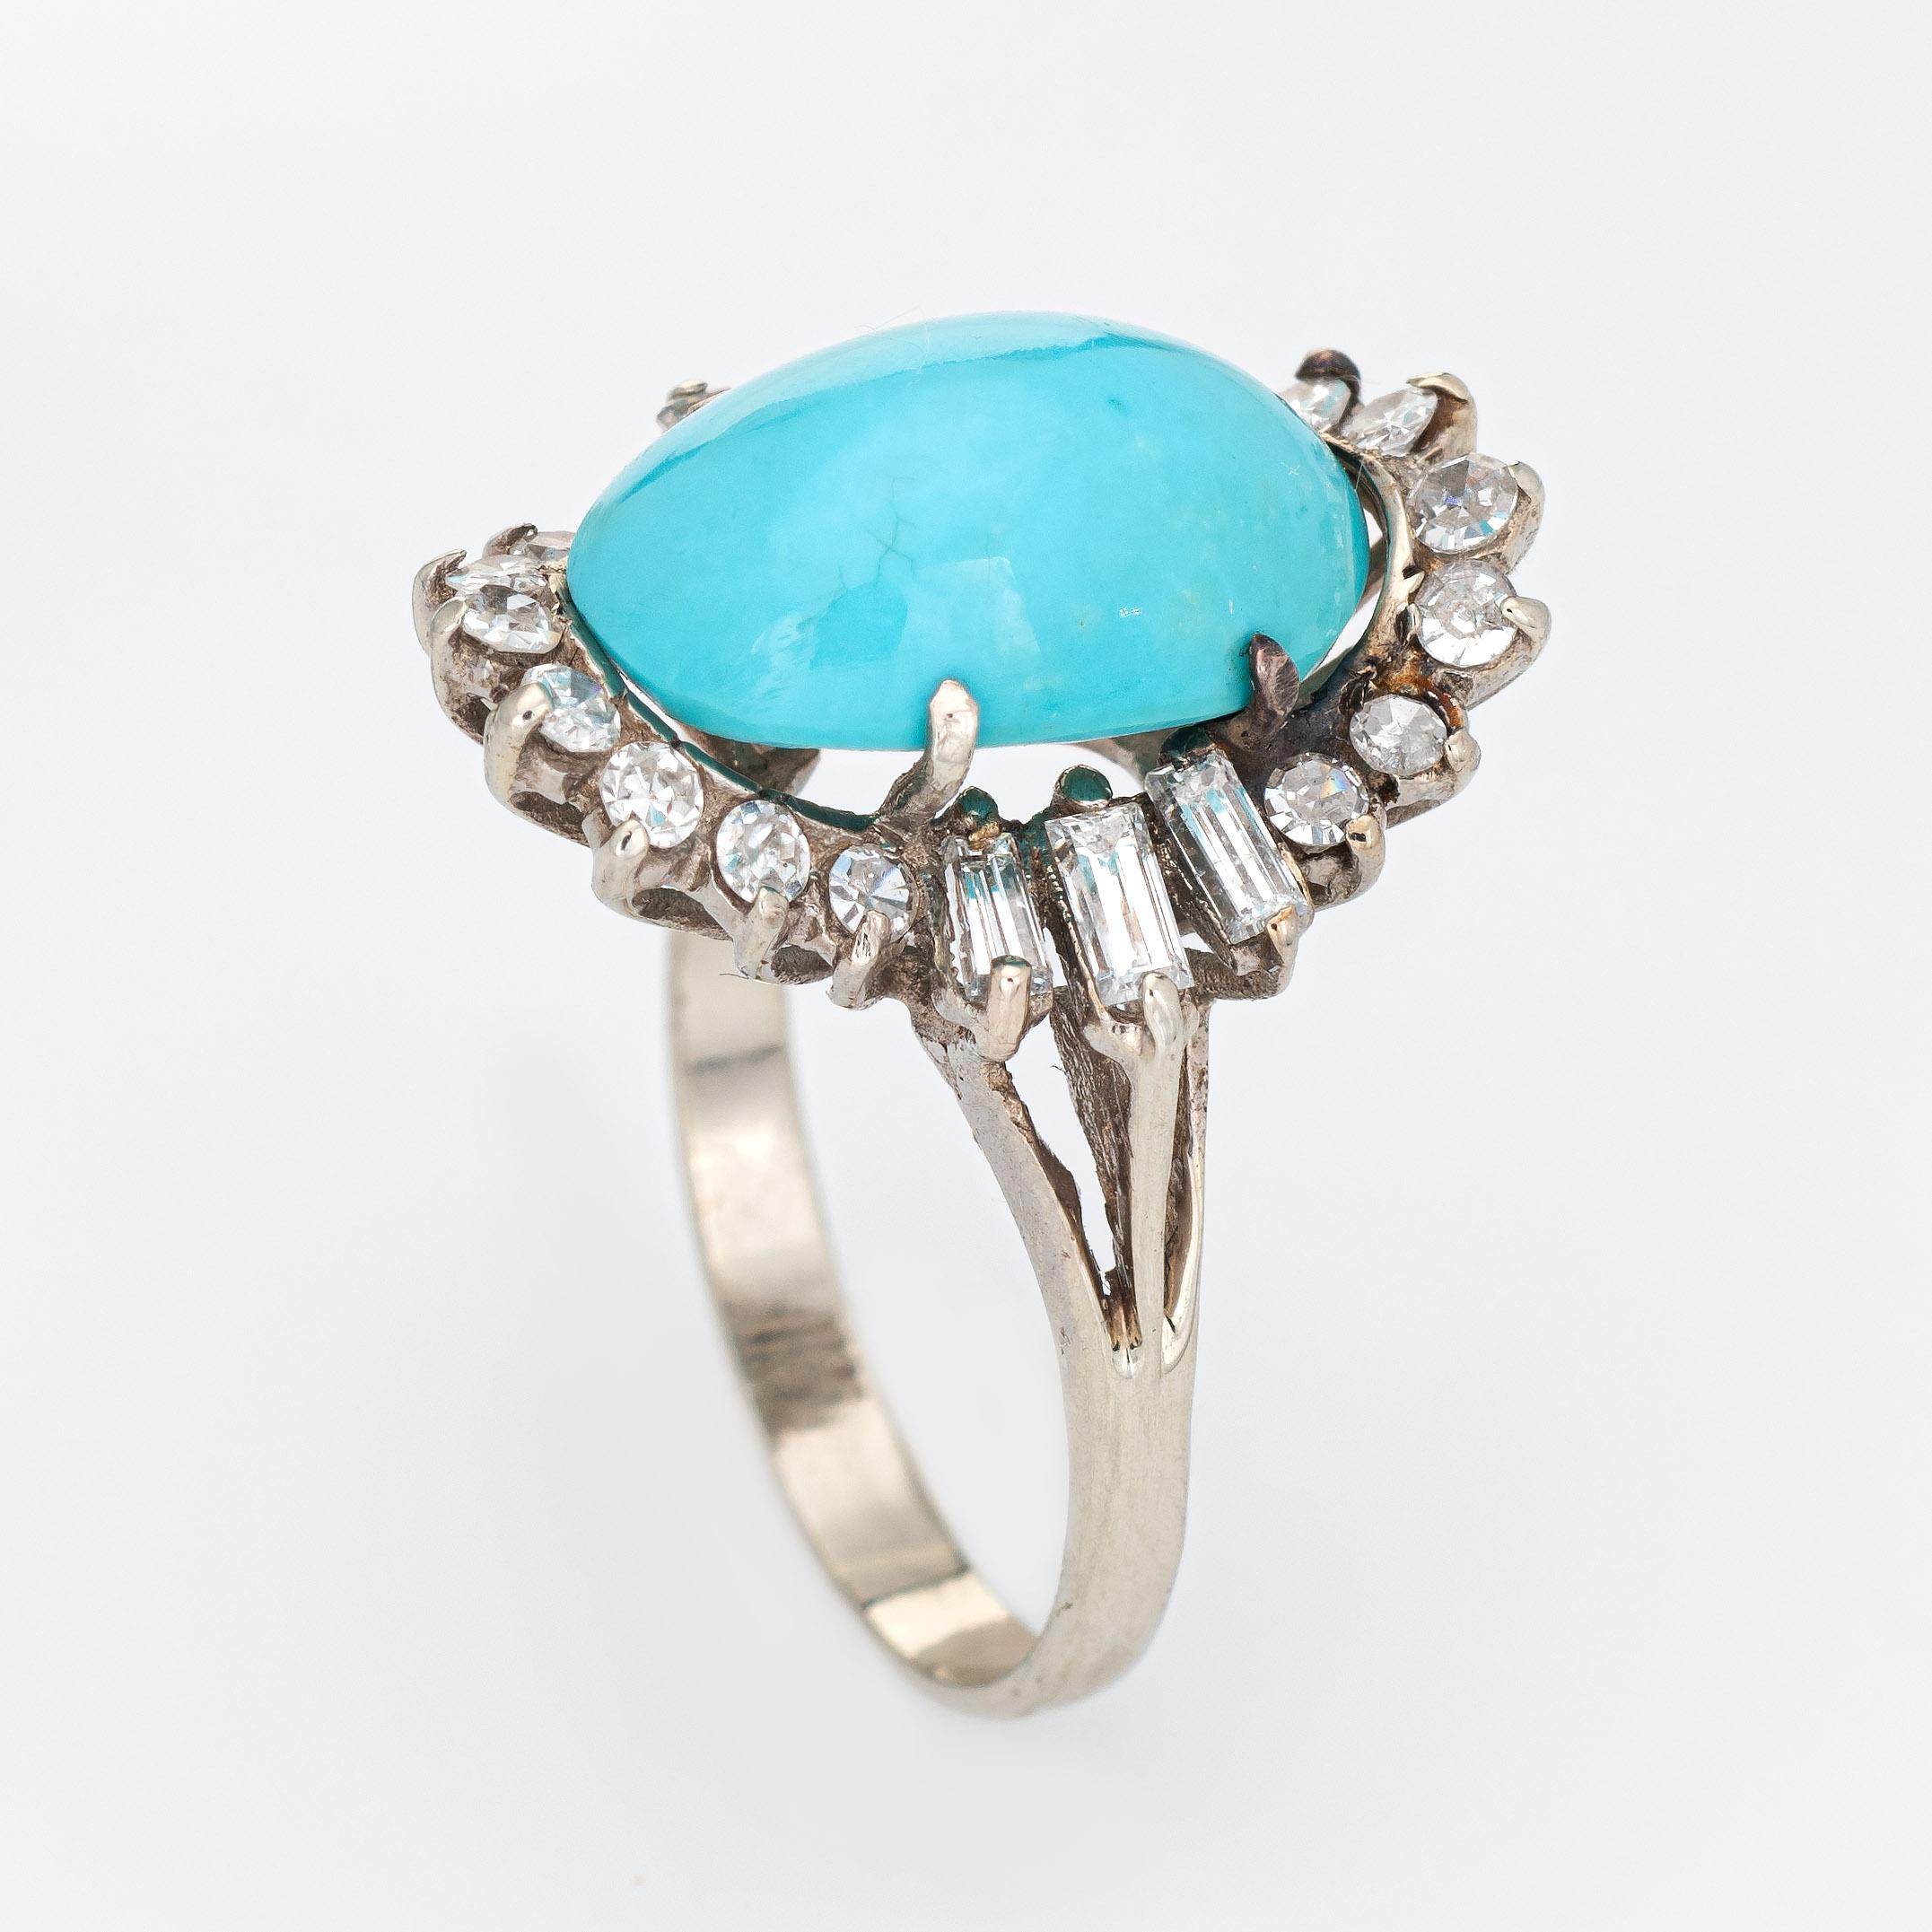 Stylish vintage turquoise & diamond ring (circa 1950s to 1960s) crafted in 14 karat white gold. 

Cabochon cut oval shaped turquoise measures 13mm x 9mm (estimated at 6.50 carats). Baguette & single cut diamonds range in size from 0.02 to 008